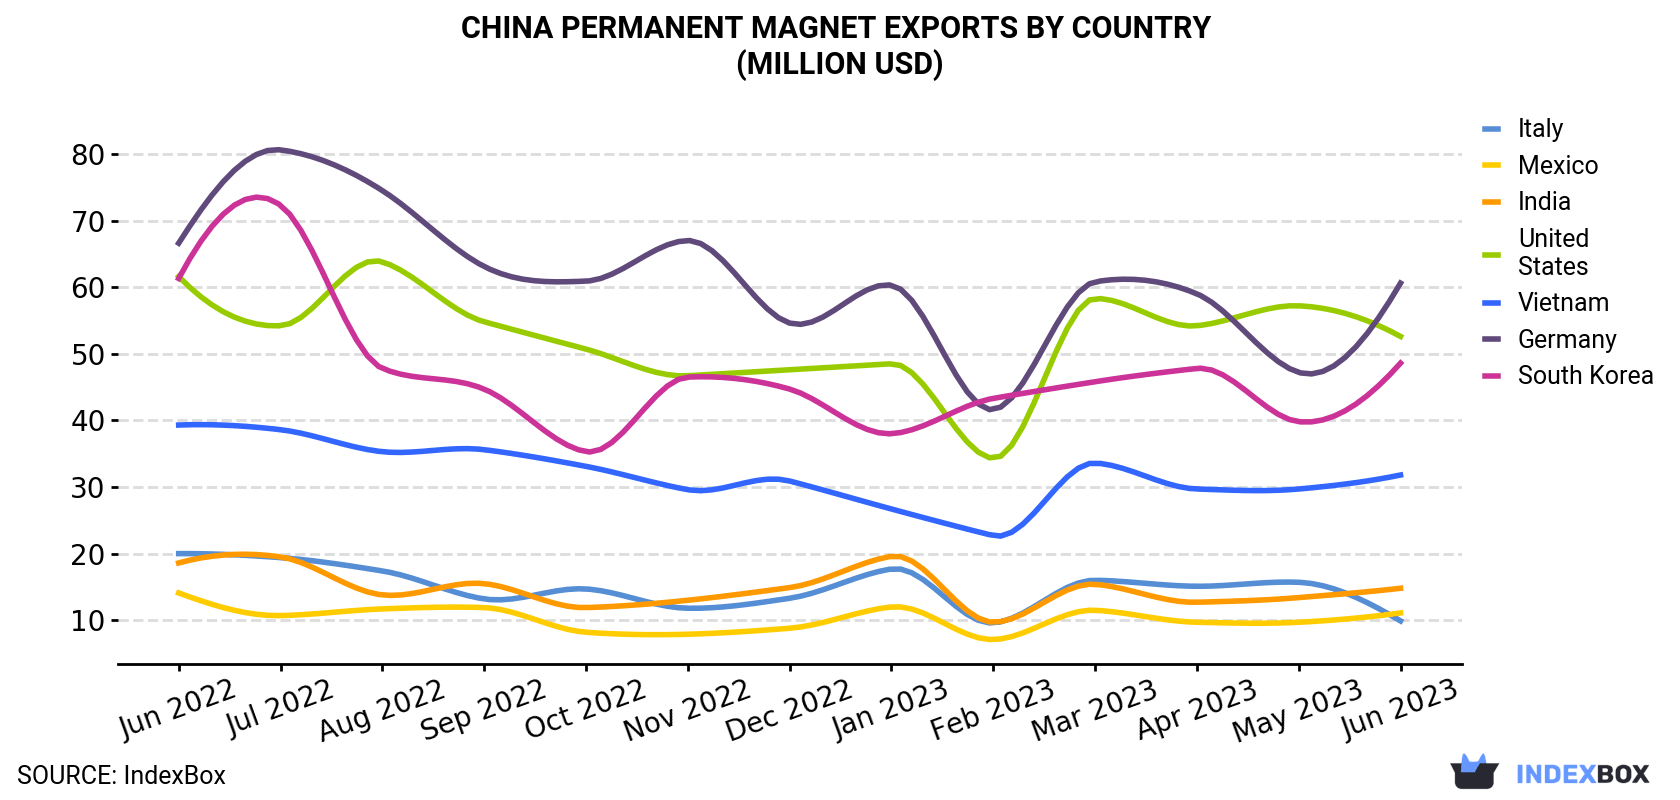 China Permanent Magnet Exports By Country (Million USD)